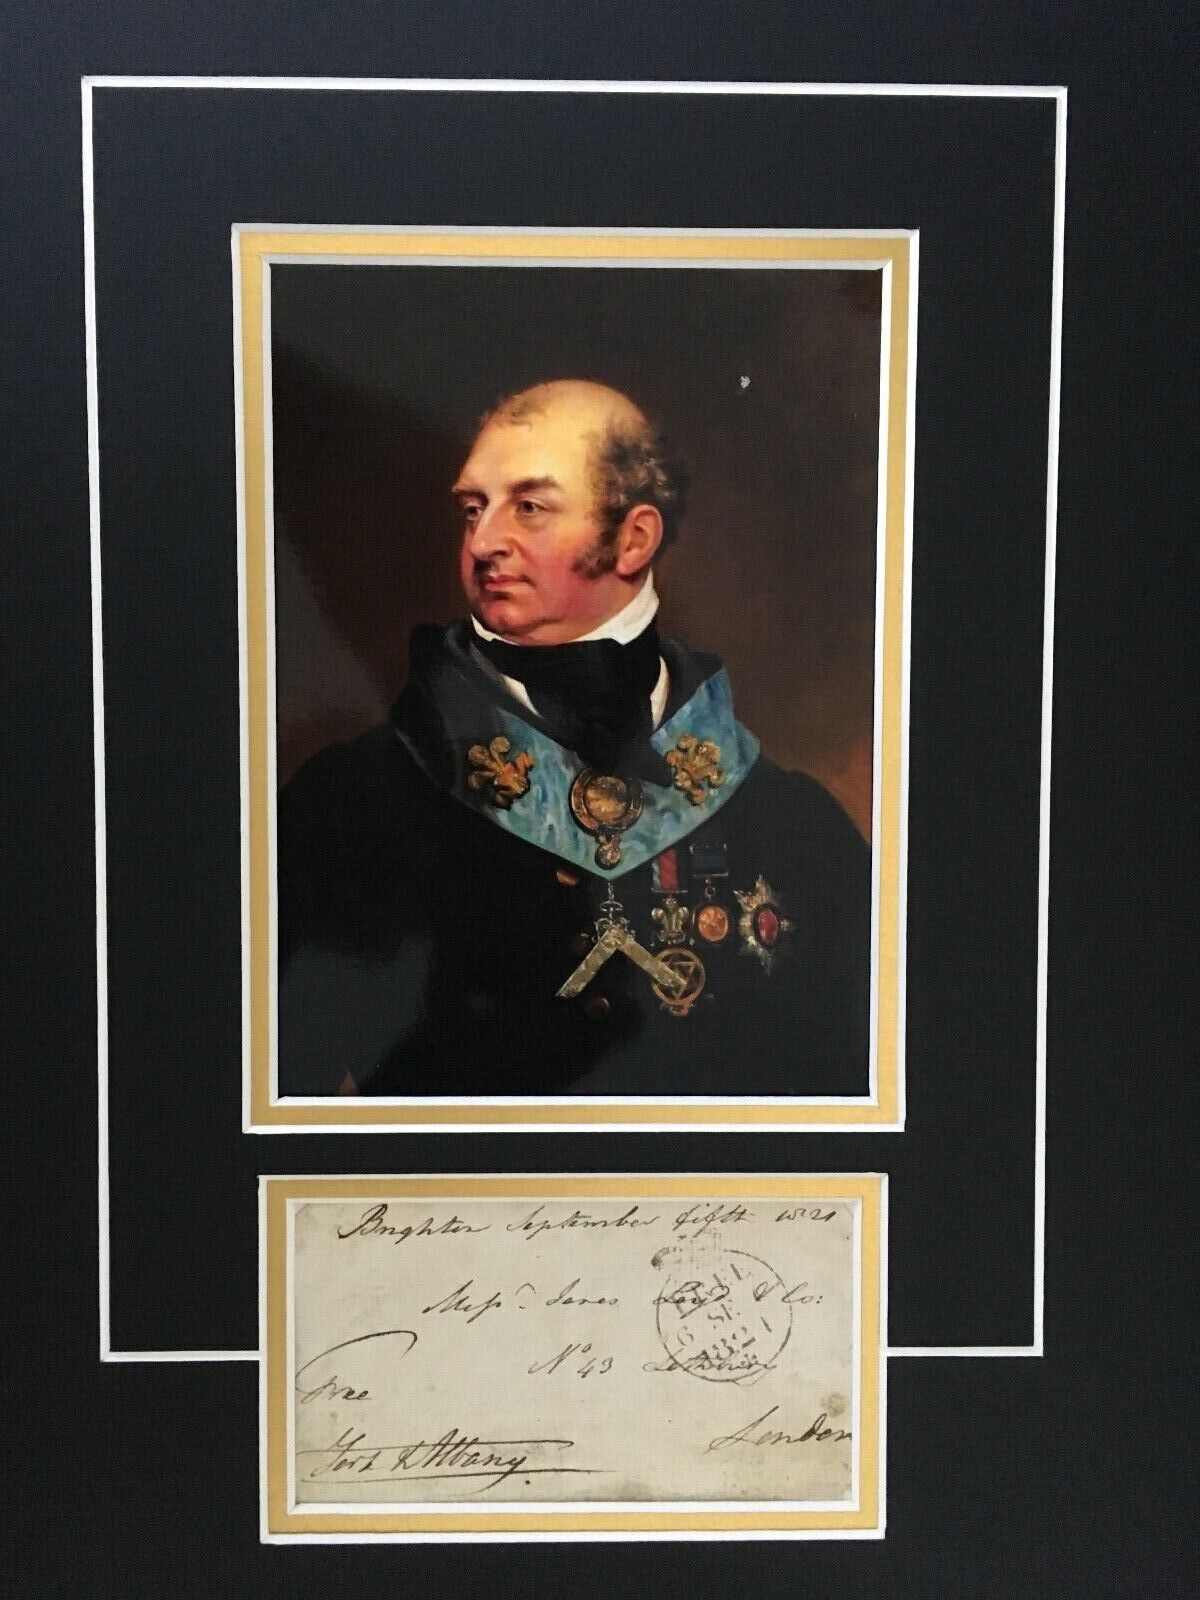 PRINCE FREDERICK - GRAND OLD DUKE OF YORK - ARMY OFFICER - SIGNED Photo Poster painting DISPLAY